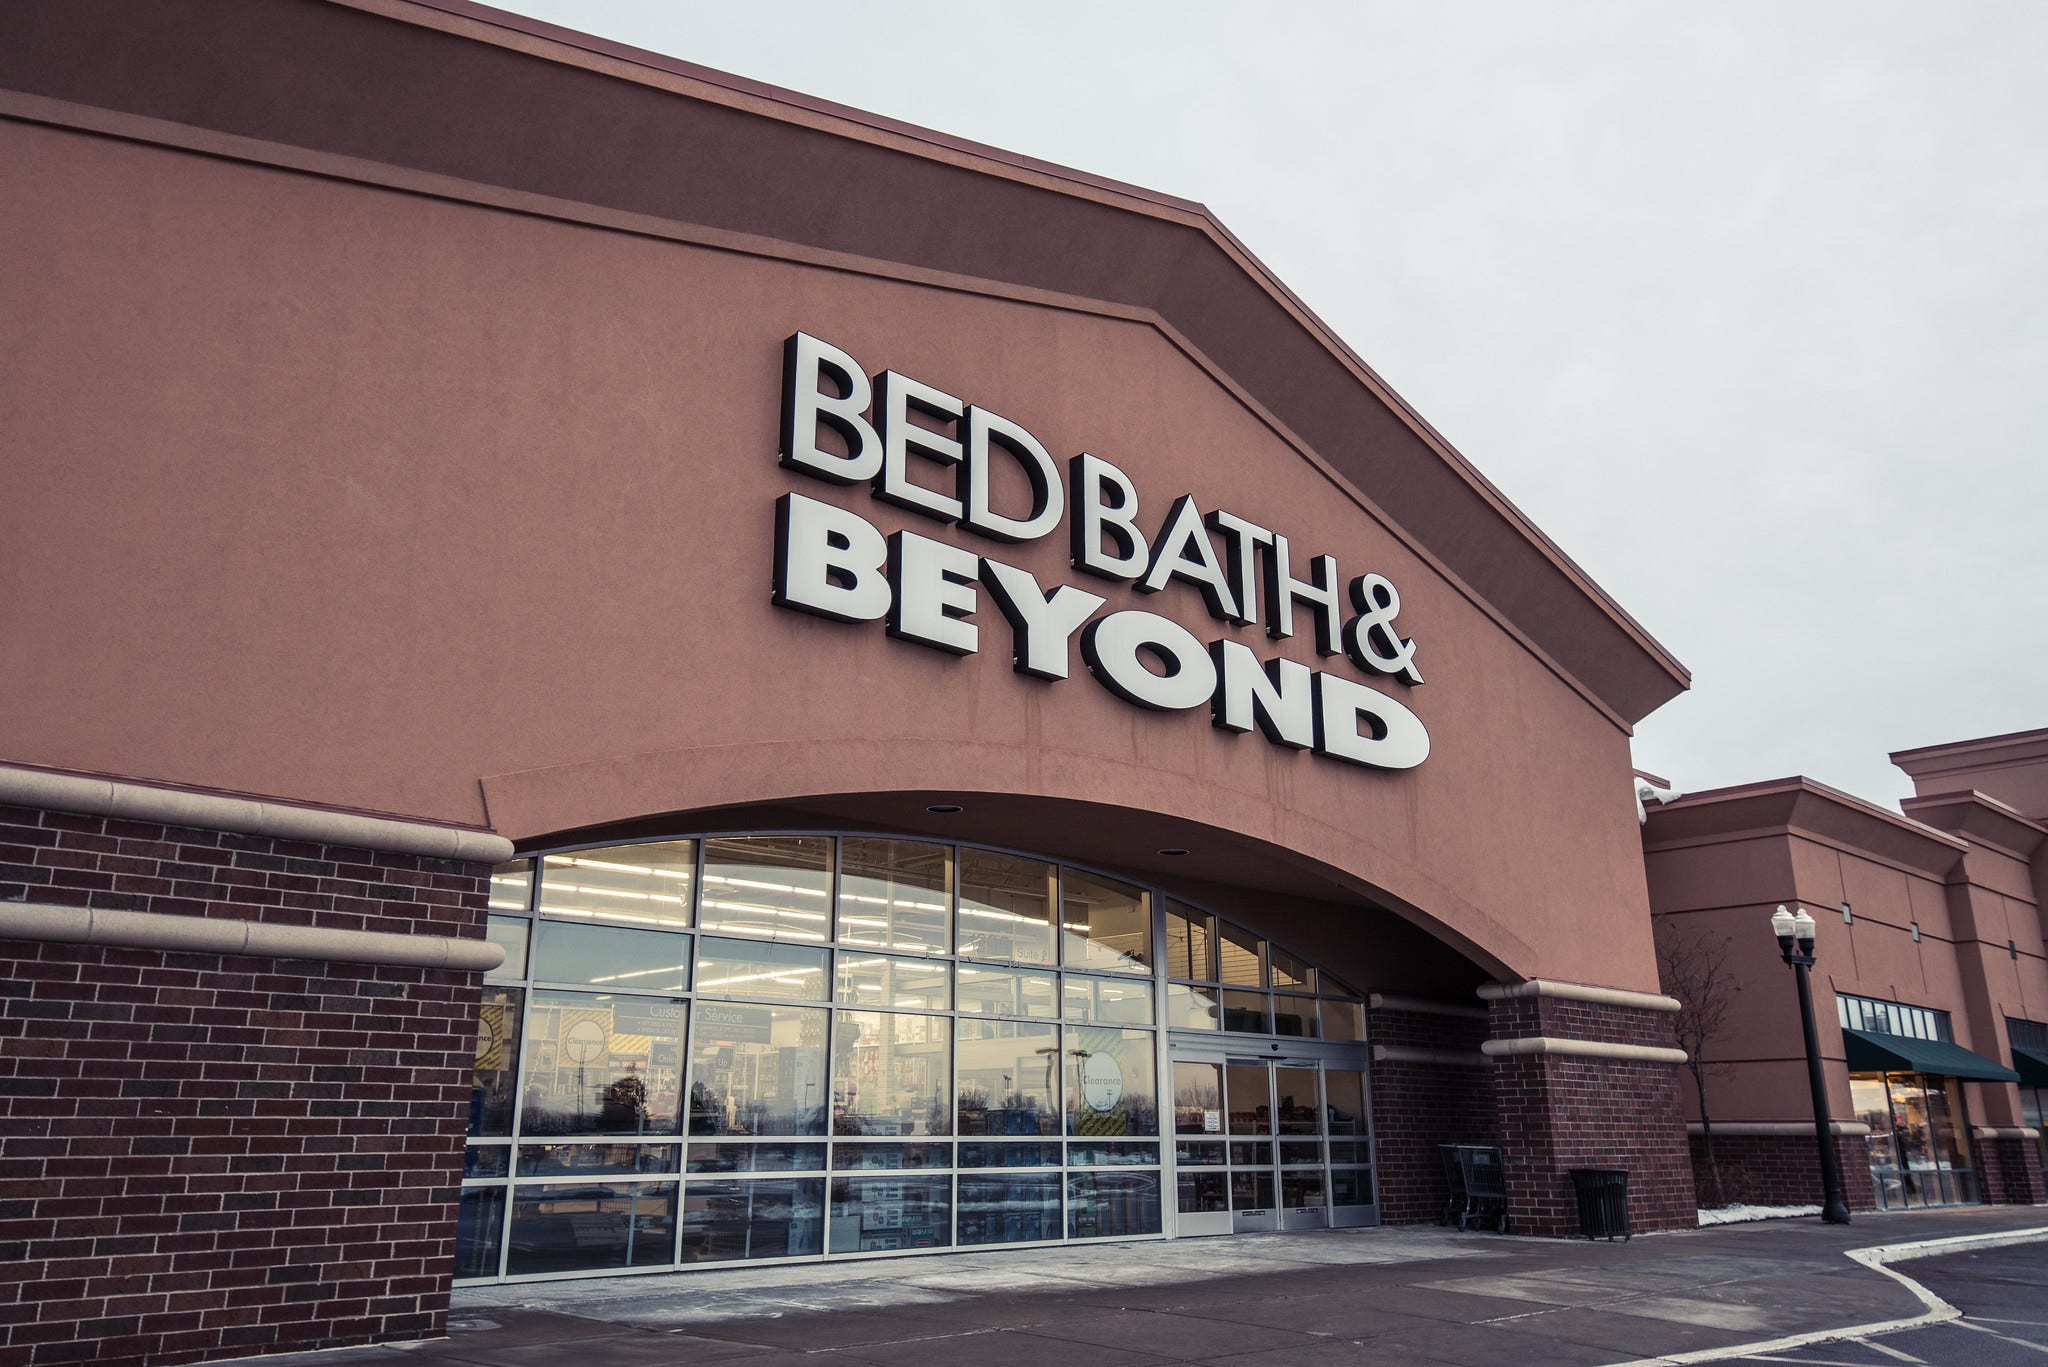 Bed Bath & Beyond Stock Squeezes 60% Higher: Why Jim Cramer Says 'It's Clear This Is Well Orchestrated'